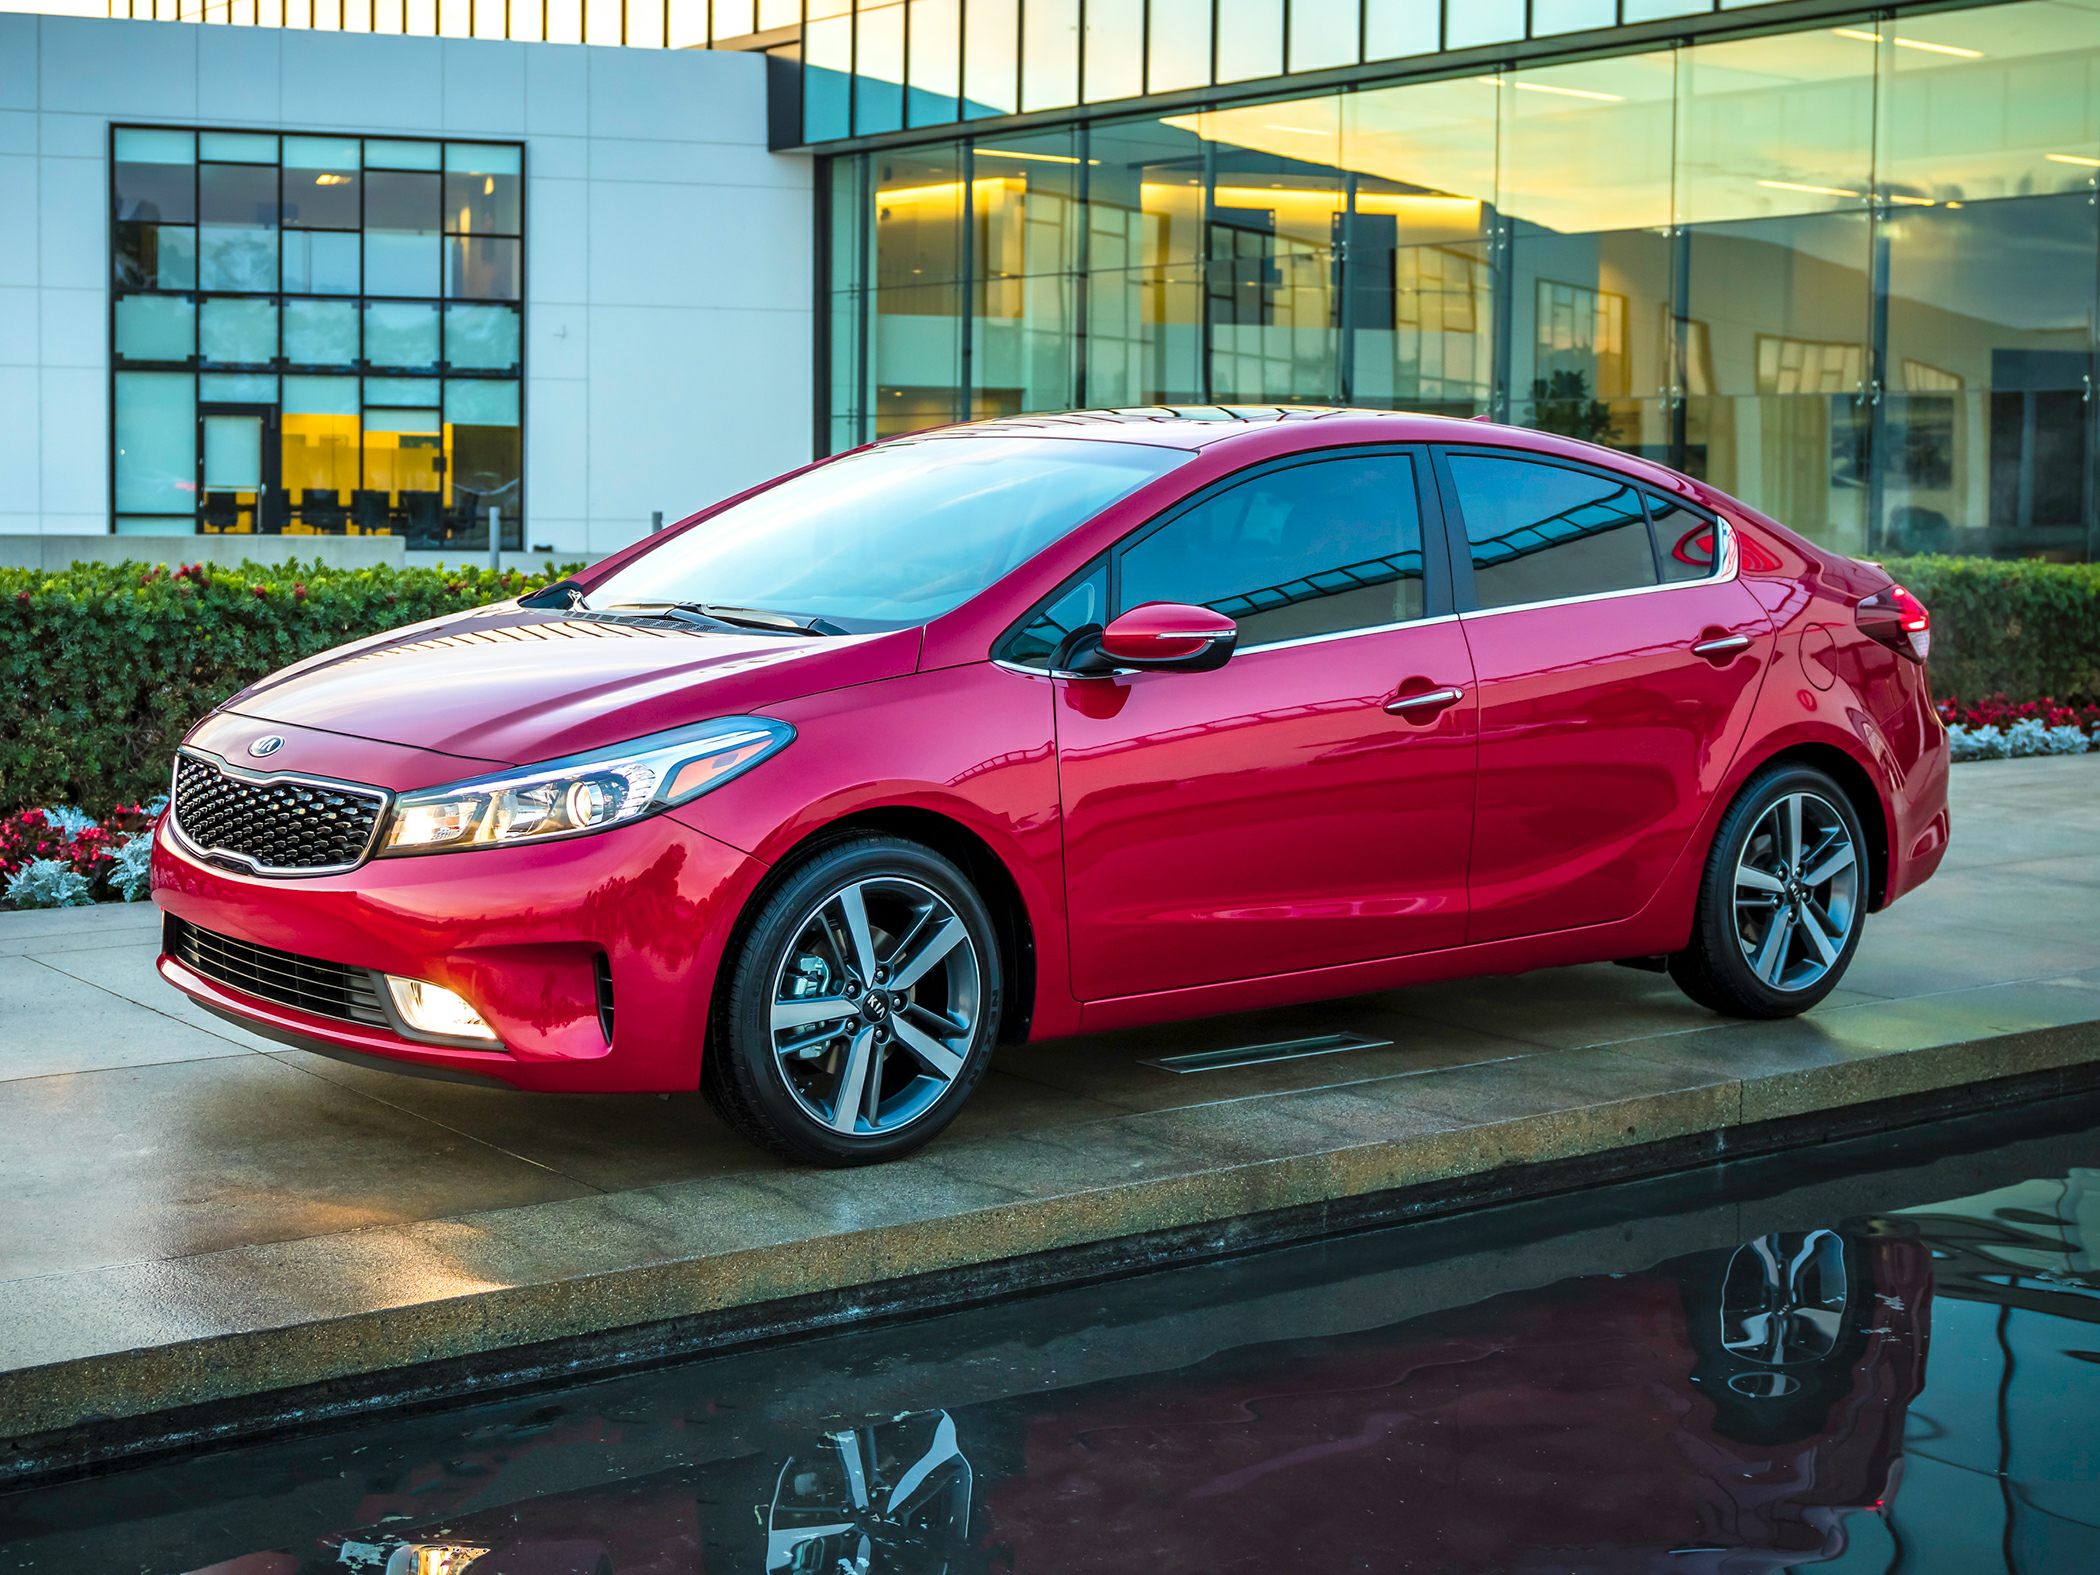 Best Kia Deals & Must-Know Advice: August 2021 - CarsDirect